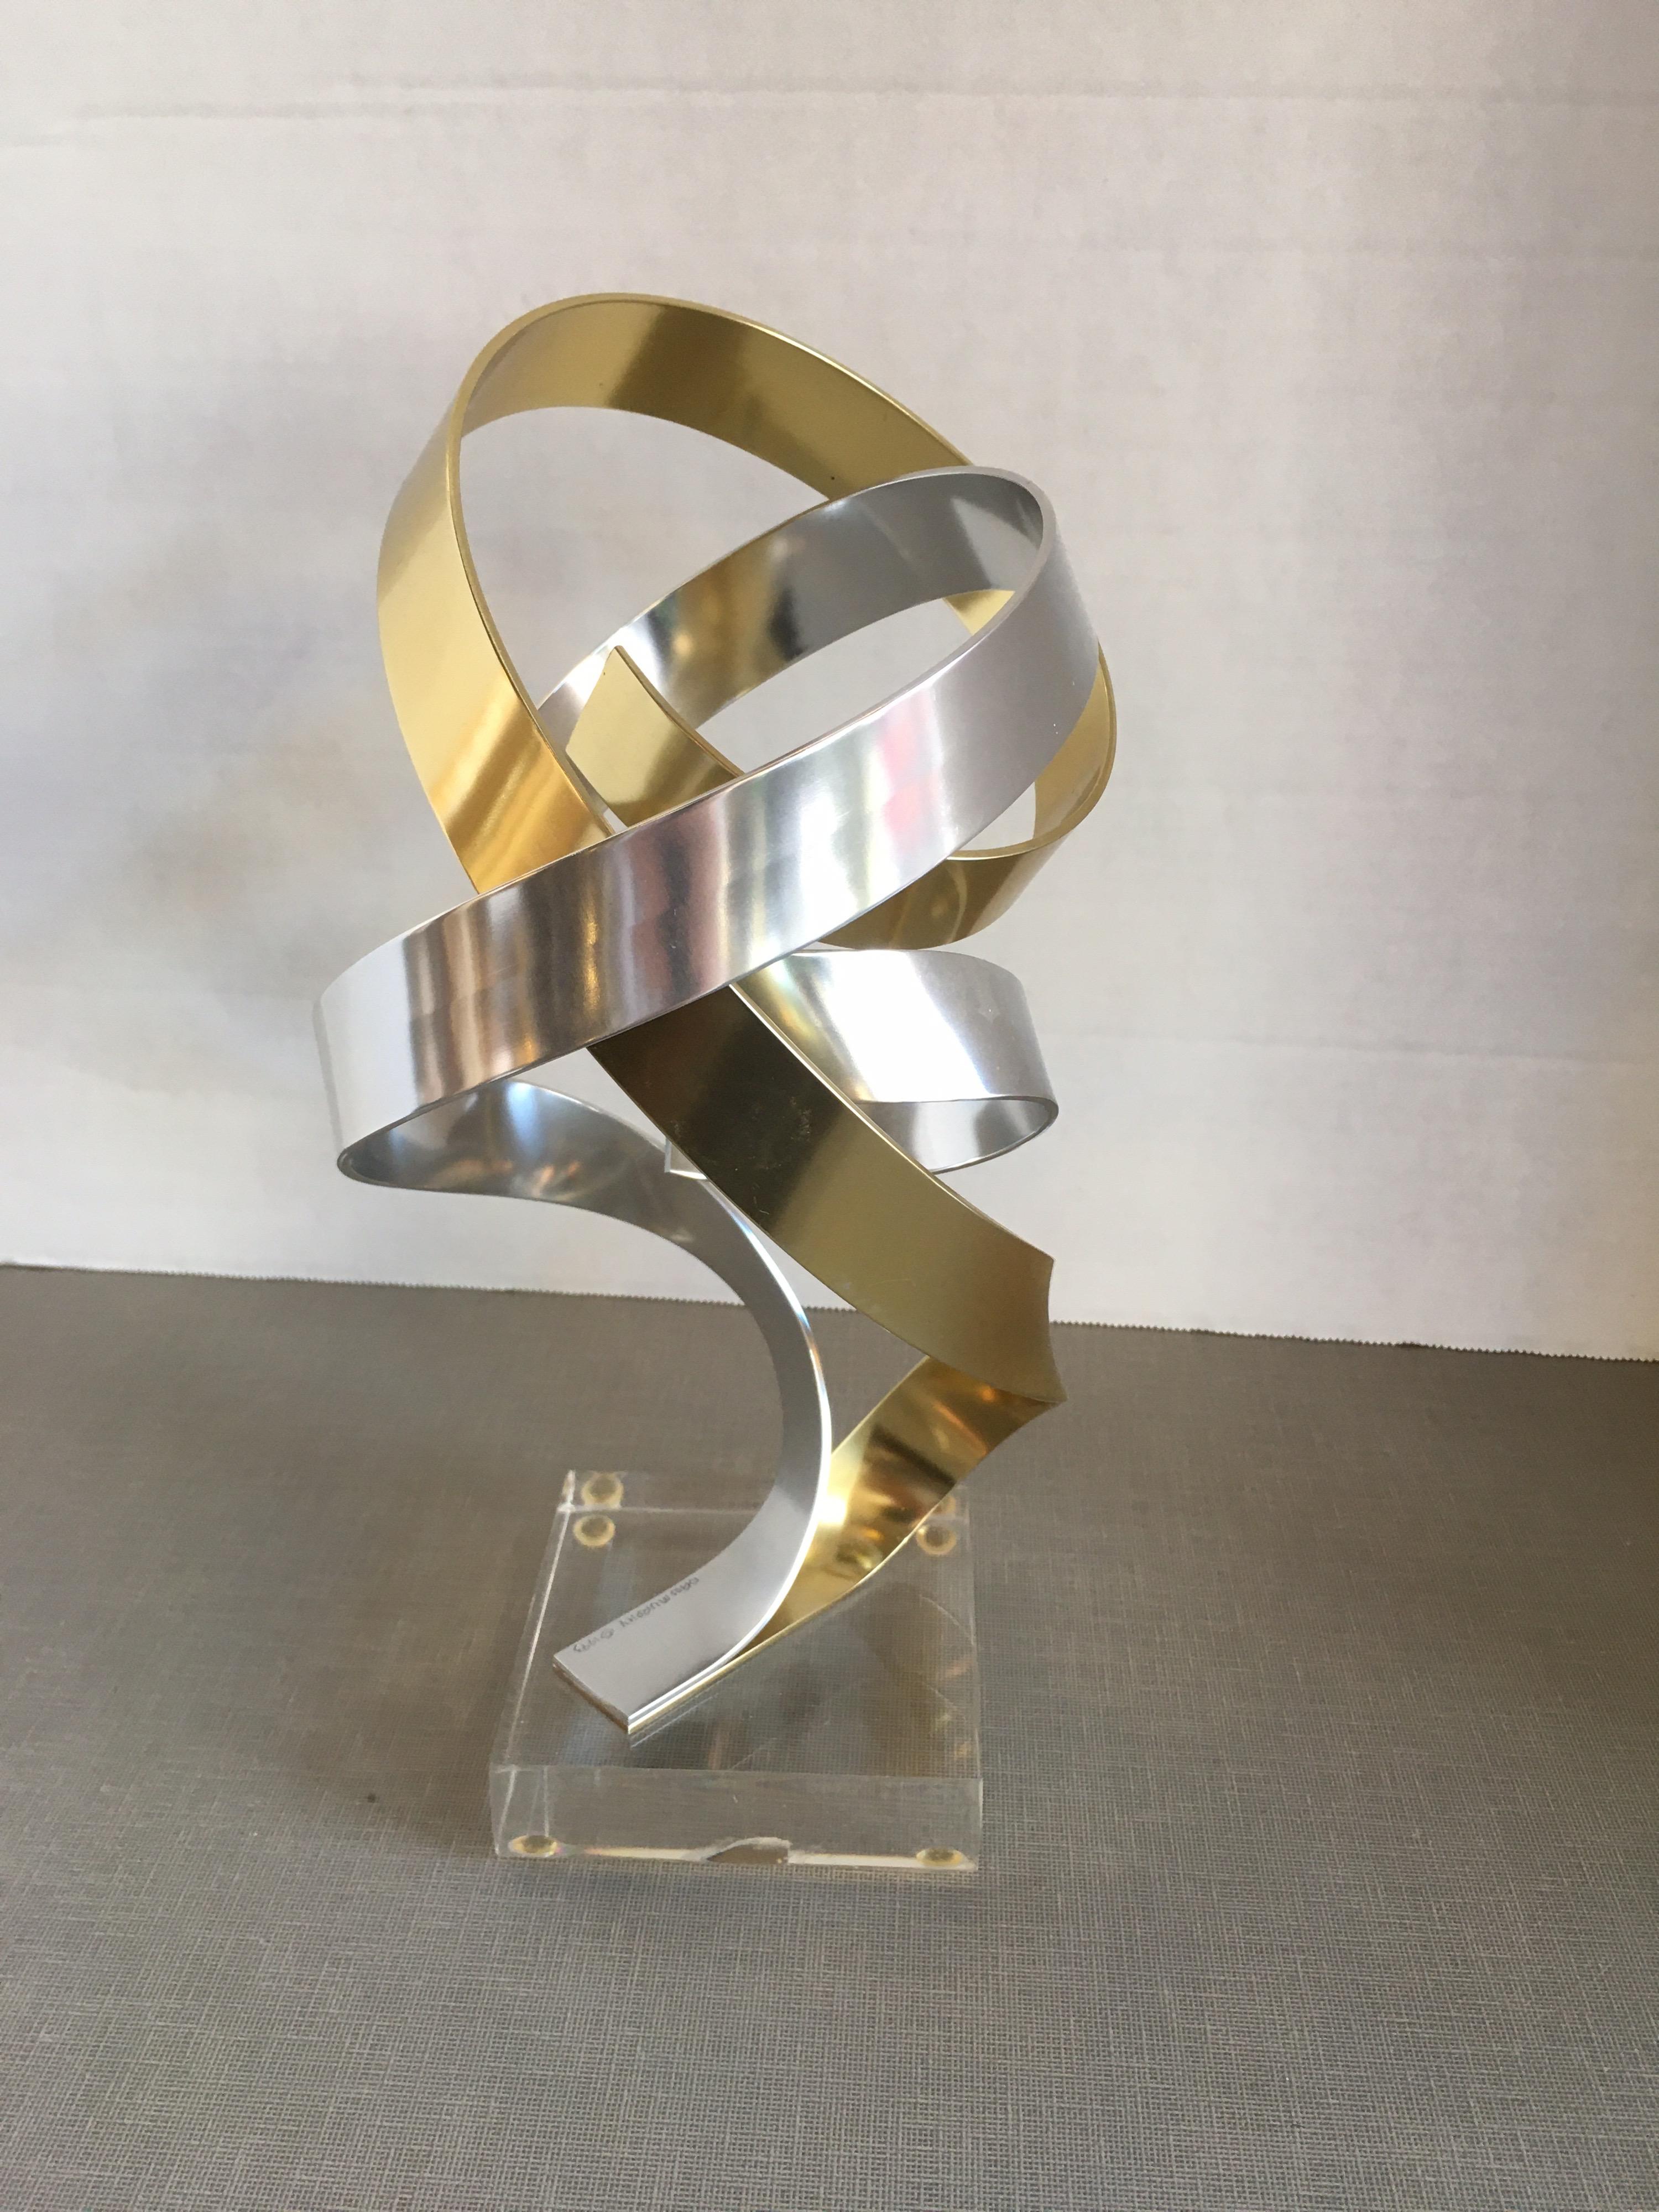 Late 20th Century Small Brass and Silver Aluminum Ribbon Sculpture by Dan Murphy